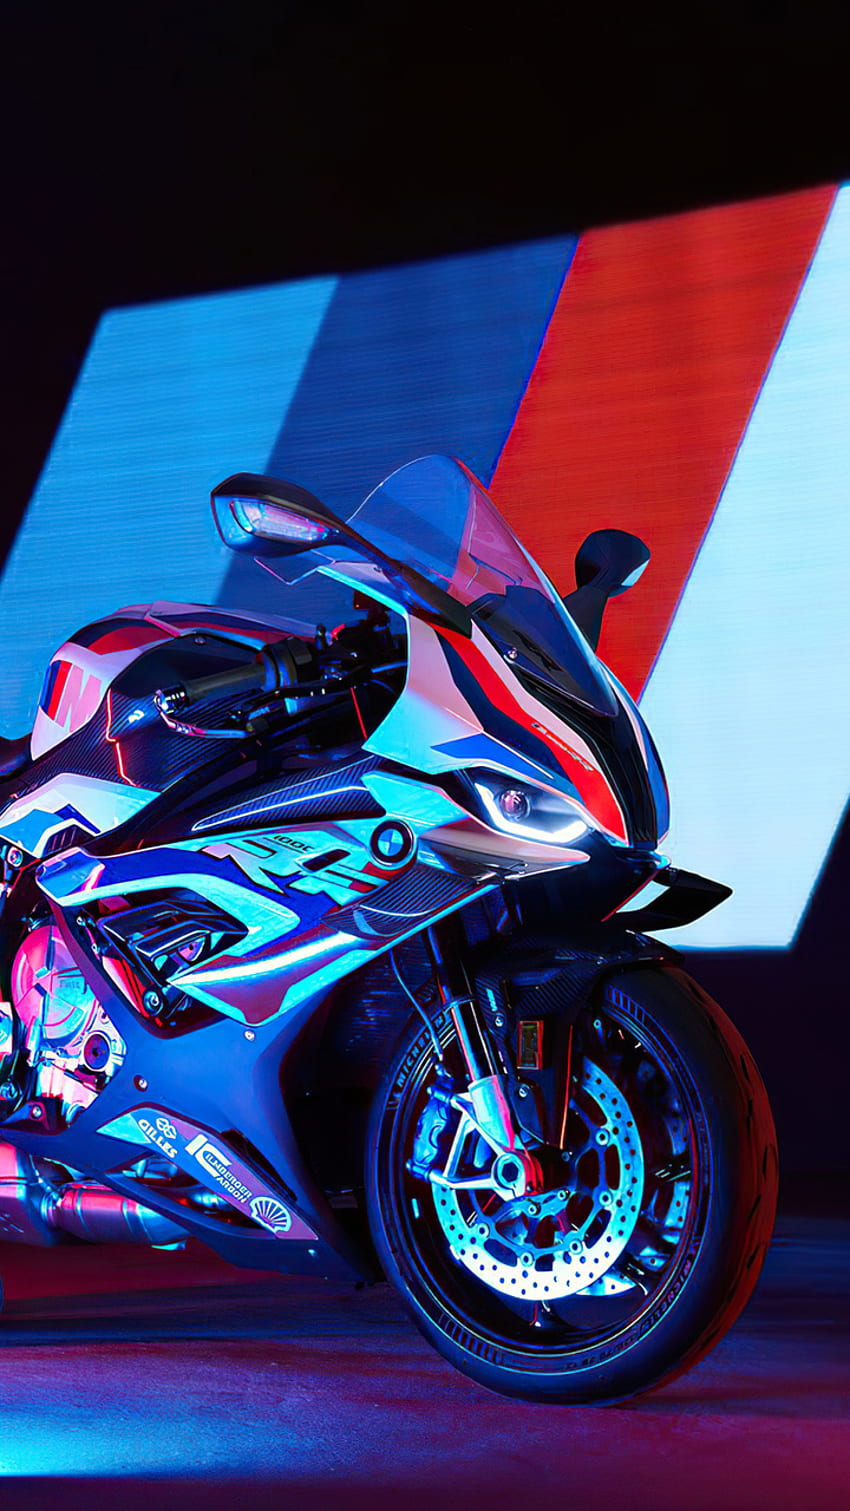 Model Update: 2023 BMW S 1000 RR, Pricing Announced! - Bike Review